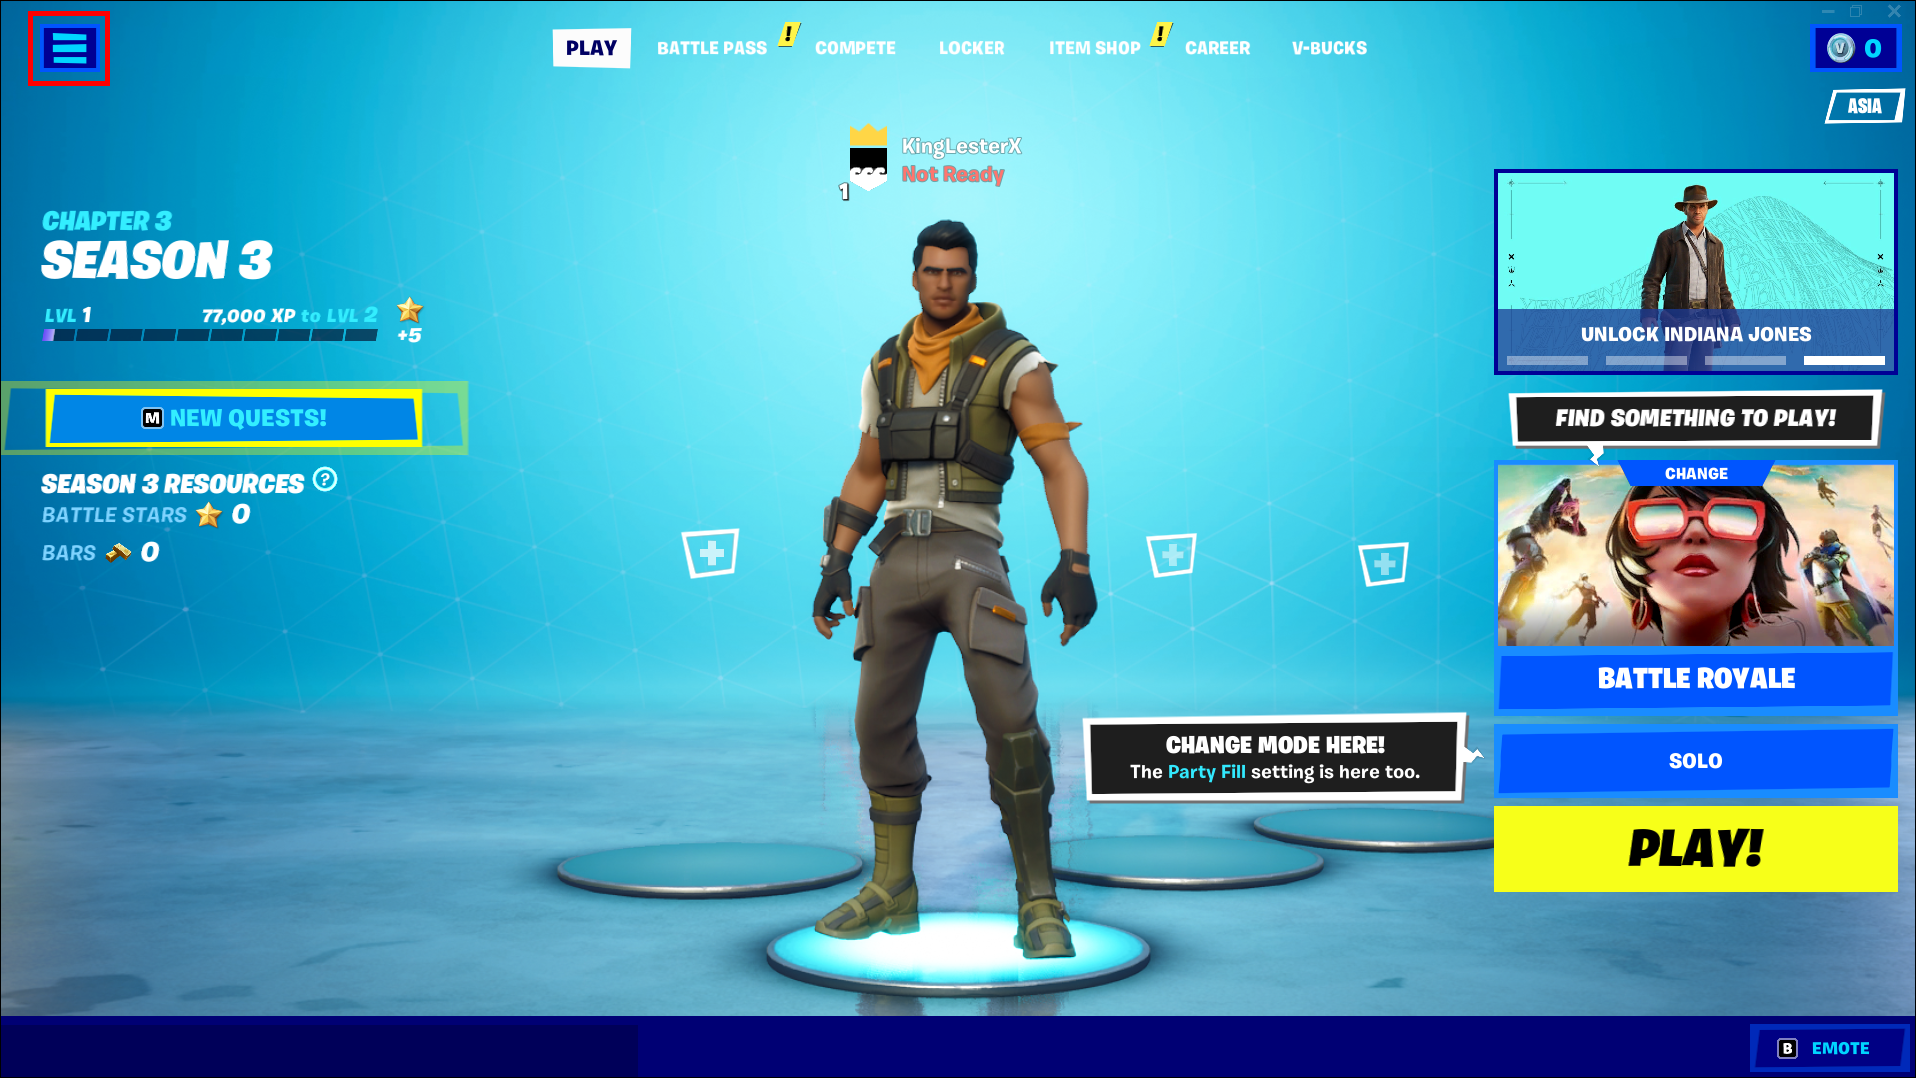 Epic Games, please allow us to appear offline in the new update